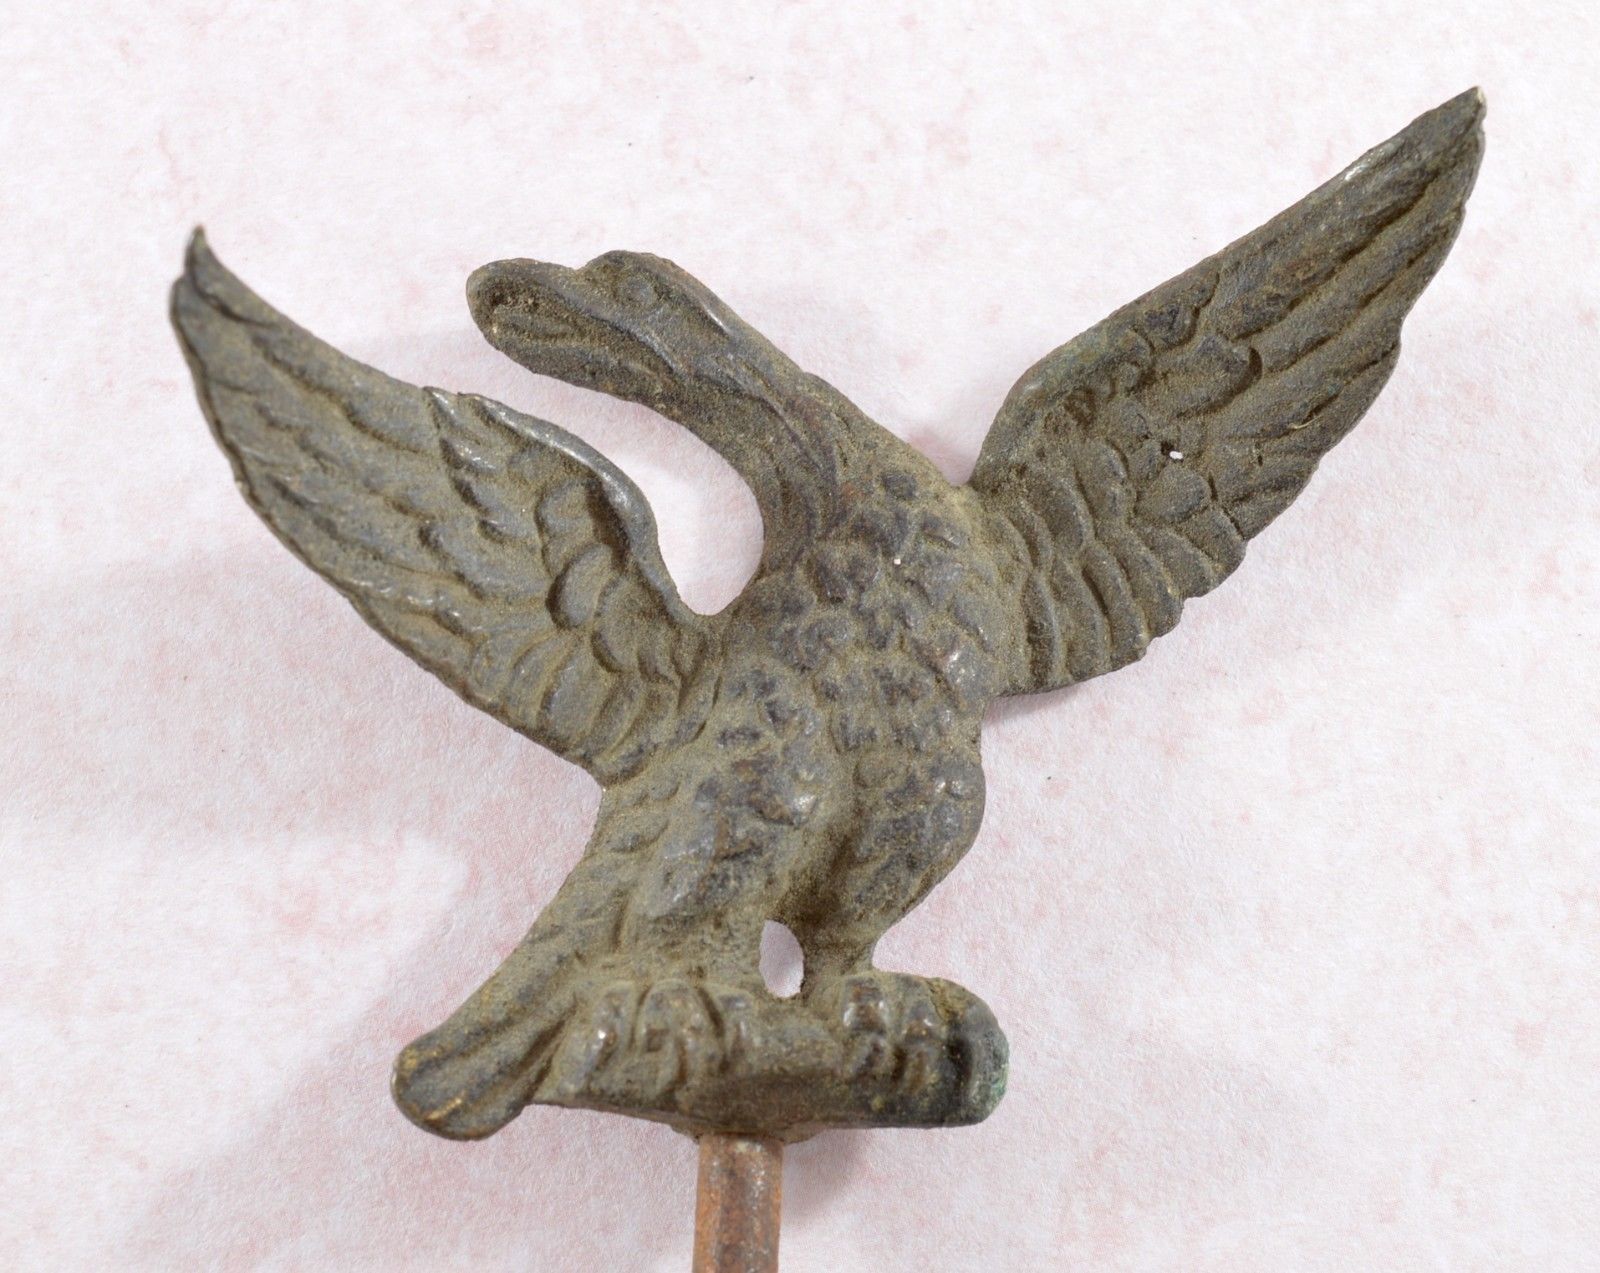 Antique/vintage unusual wrought or cast iron eagle/bird finial?